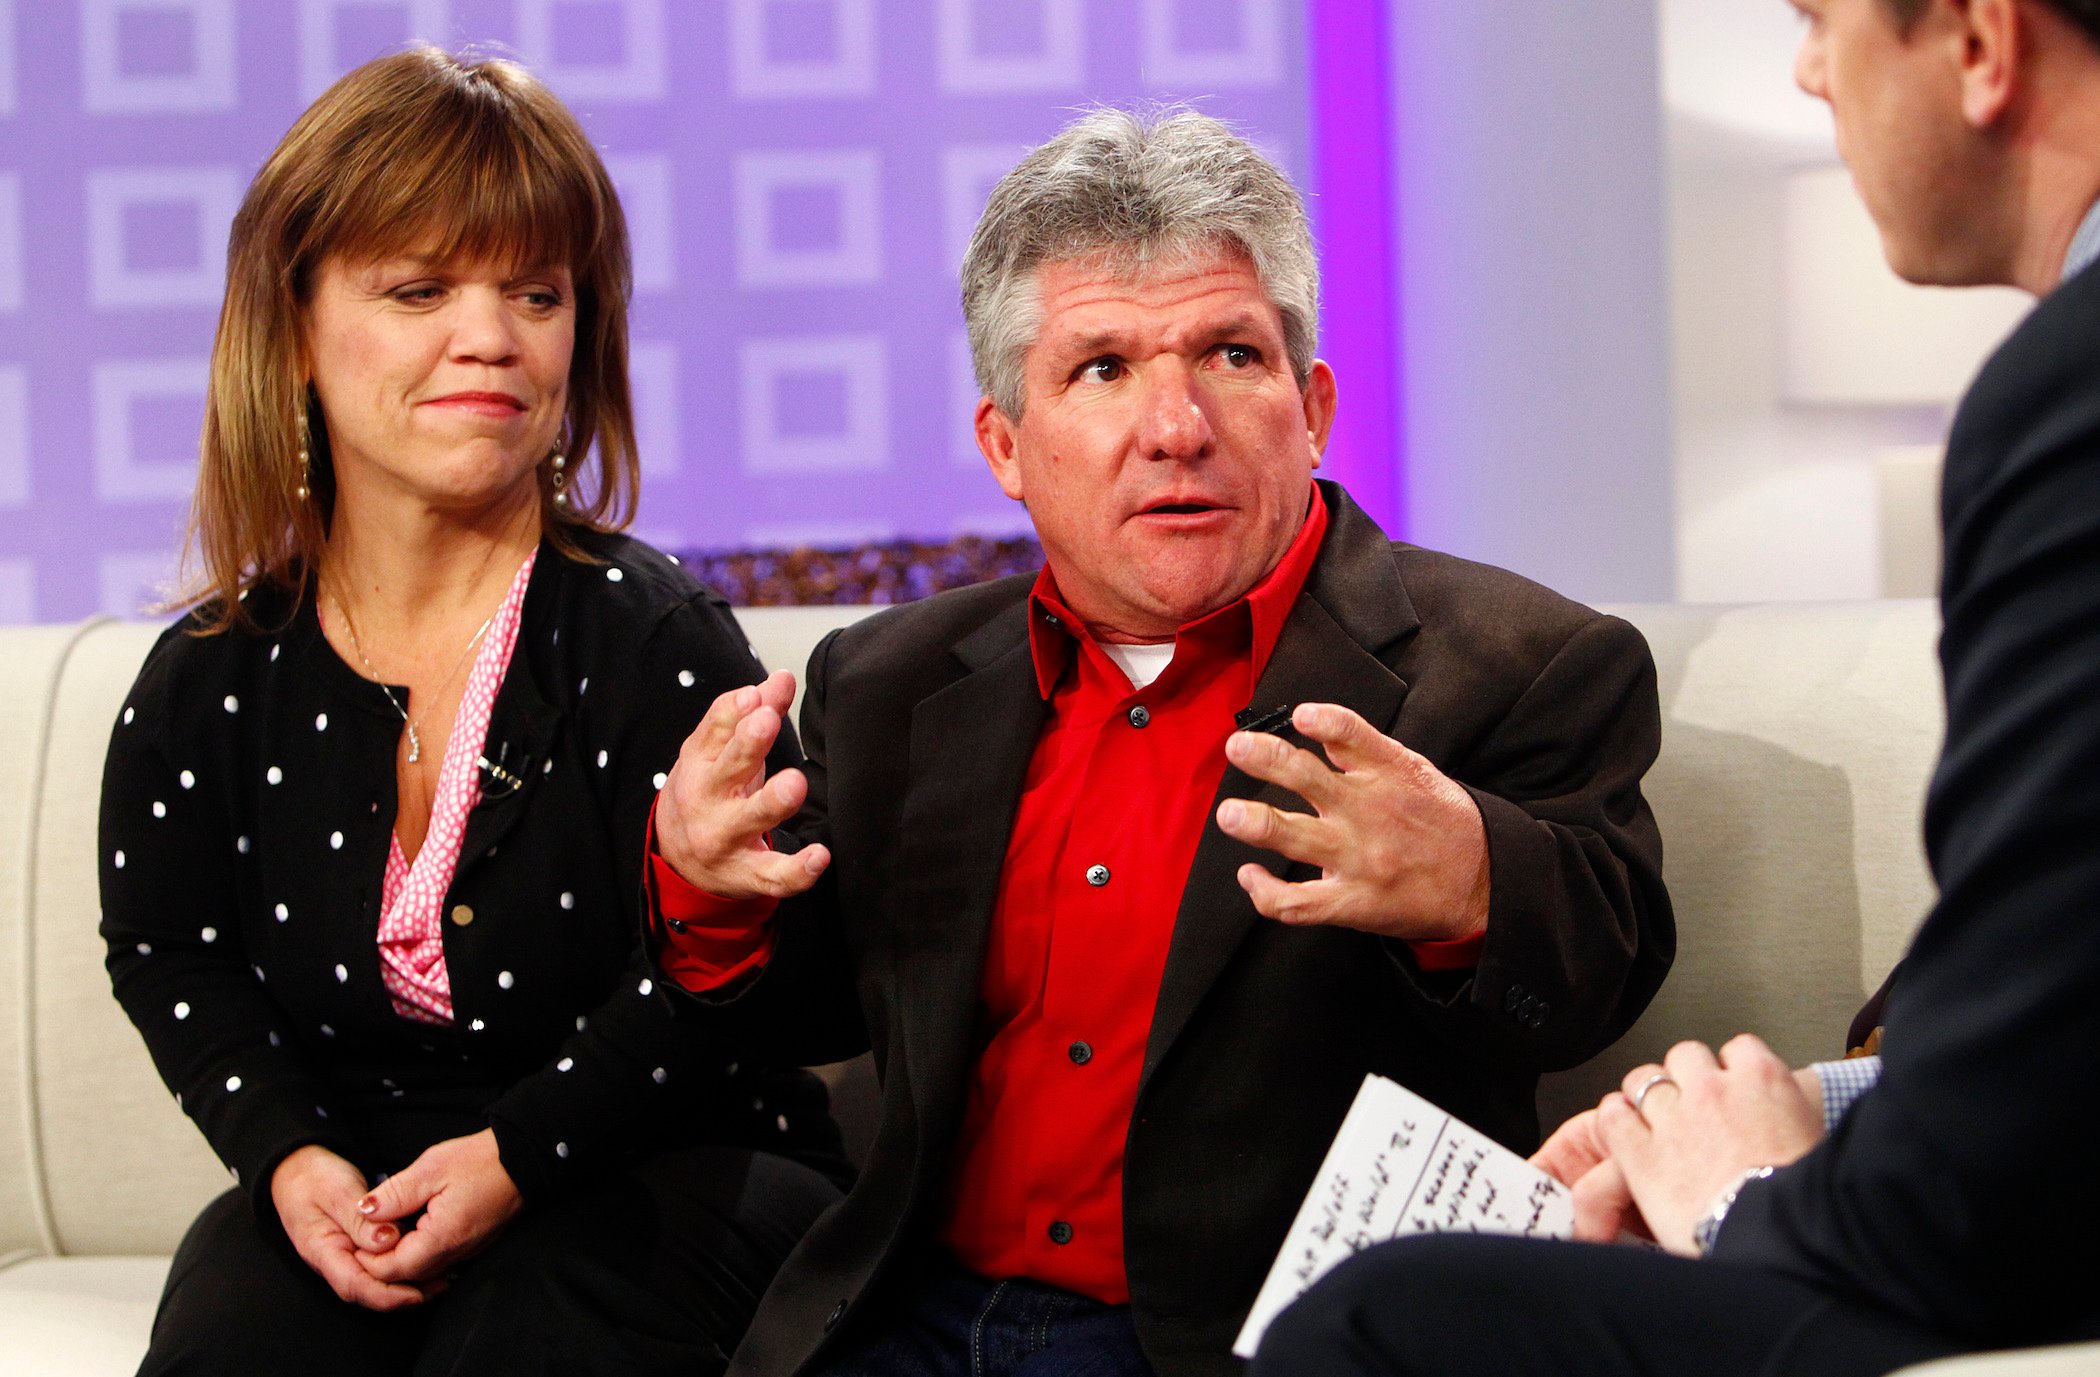 Amy Roloff and Matt Roloff from 'Little People, Big World' Season 23 sitting together and talking to an interviewer